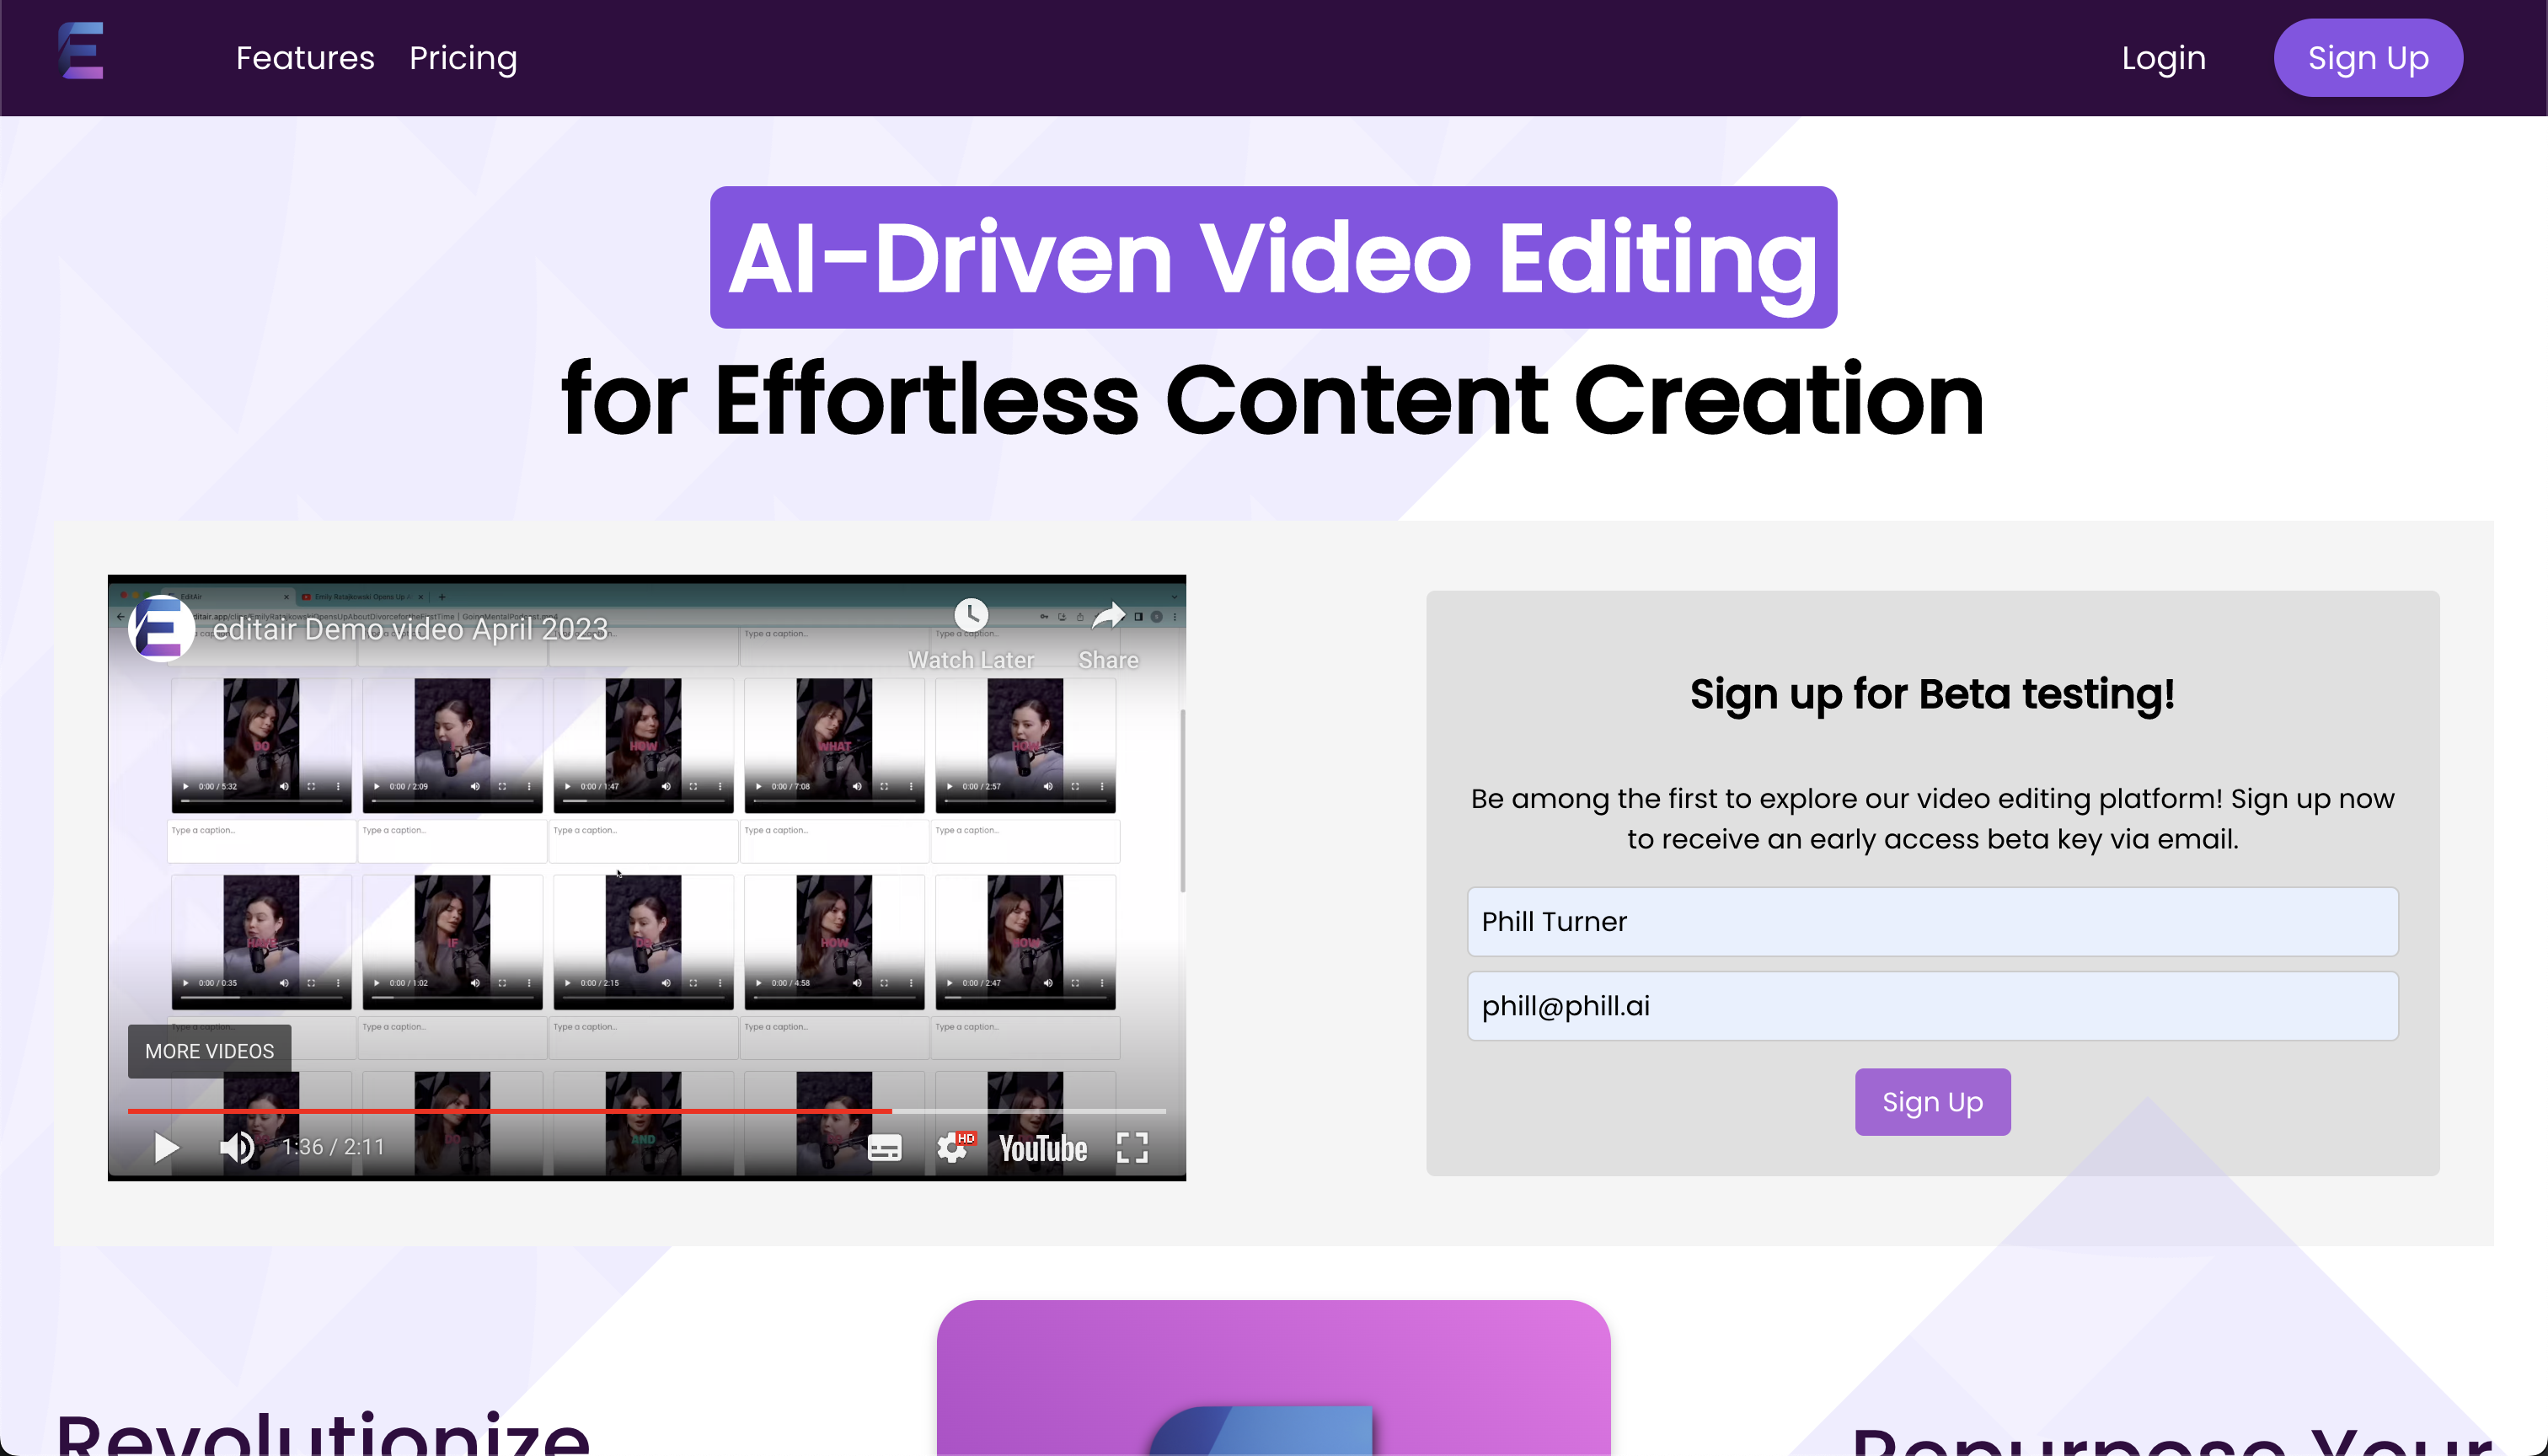 EDITAIR: Futuristic Video Editing with AI for Effortless Content Creation = mind blown